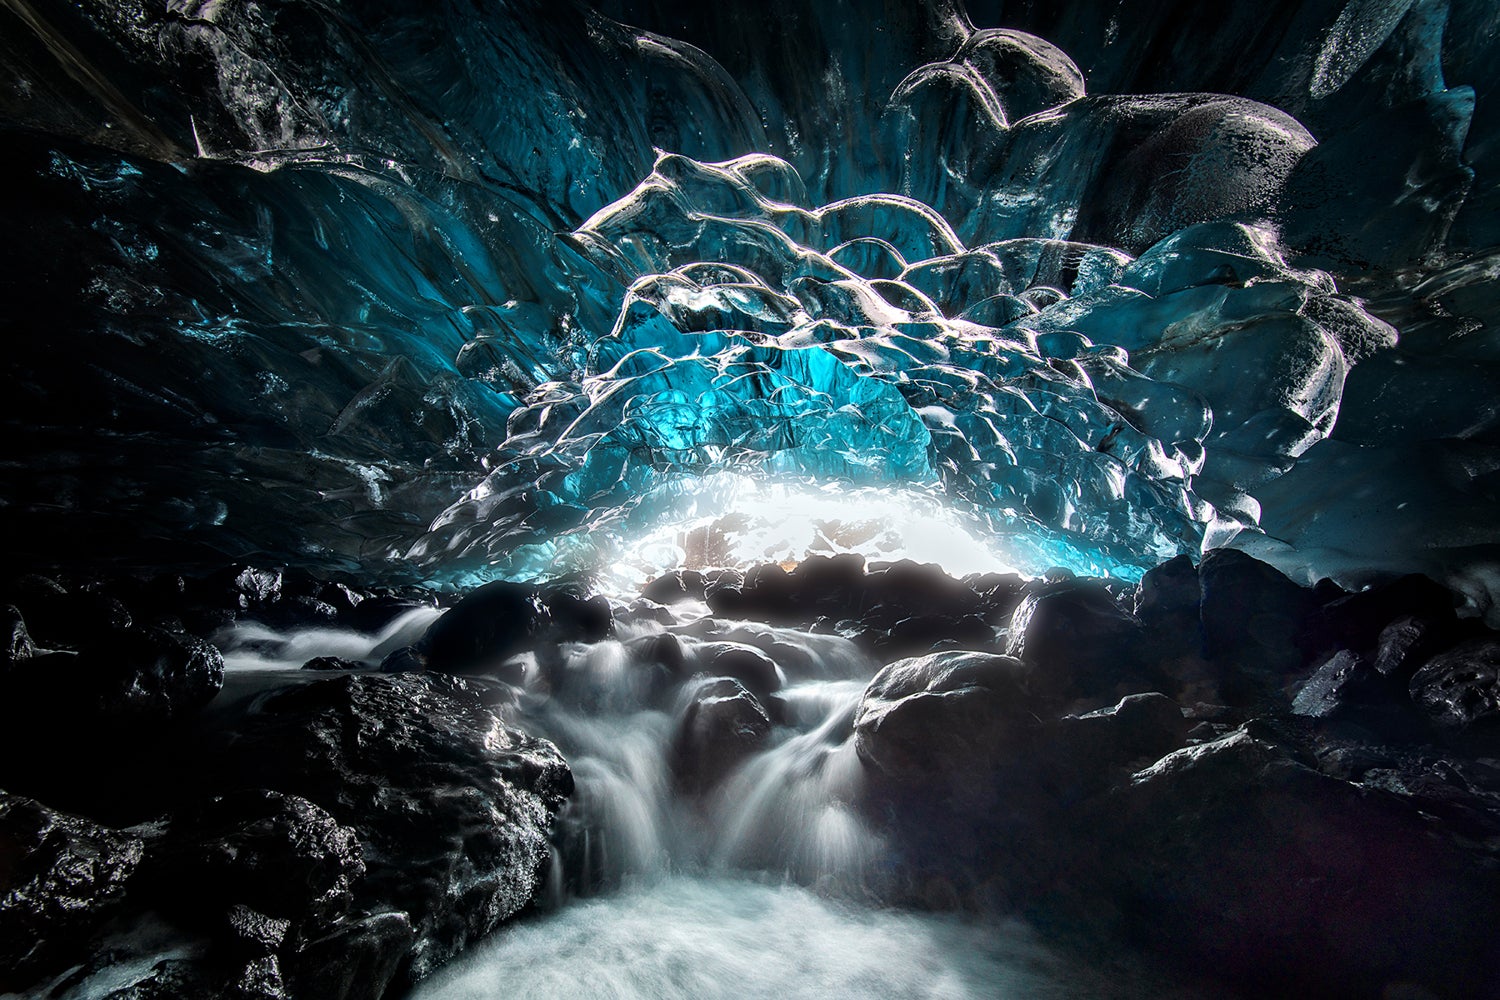 Wall Mural Photo Wallpaper Blue Glacier Cave | Order now!!